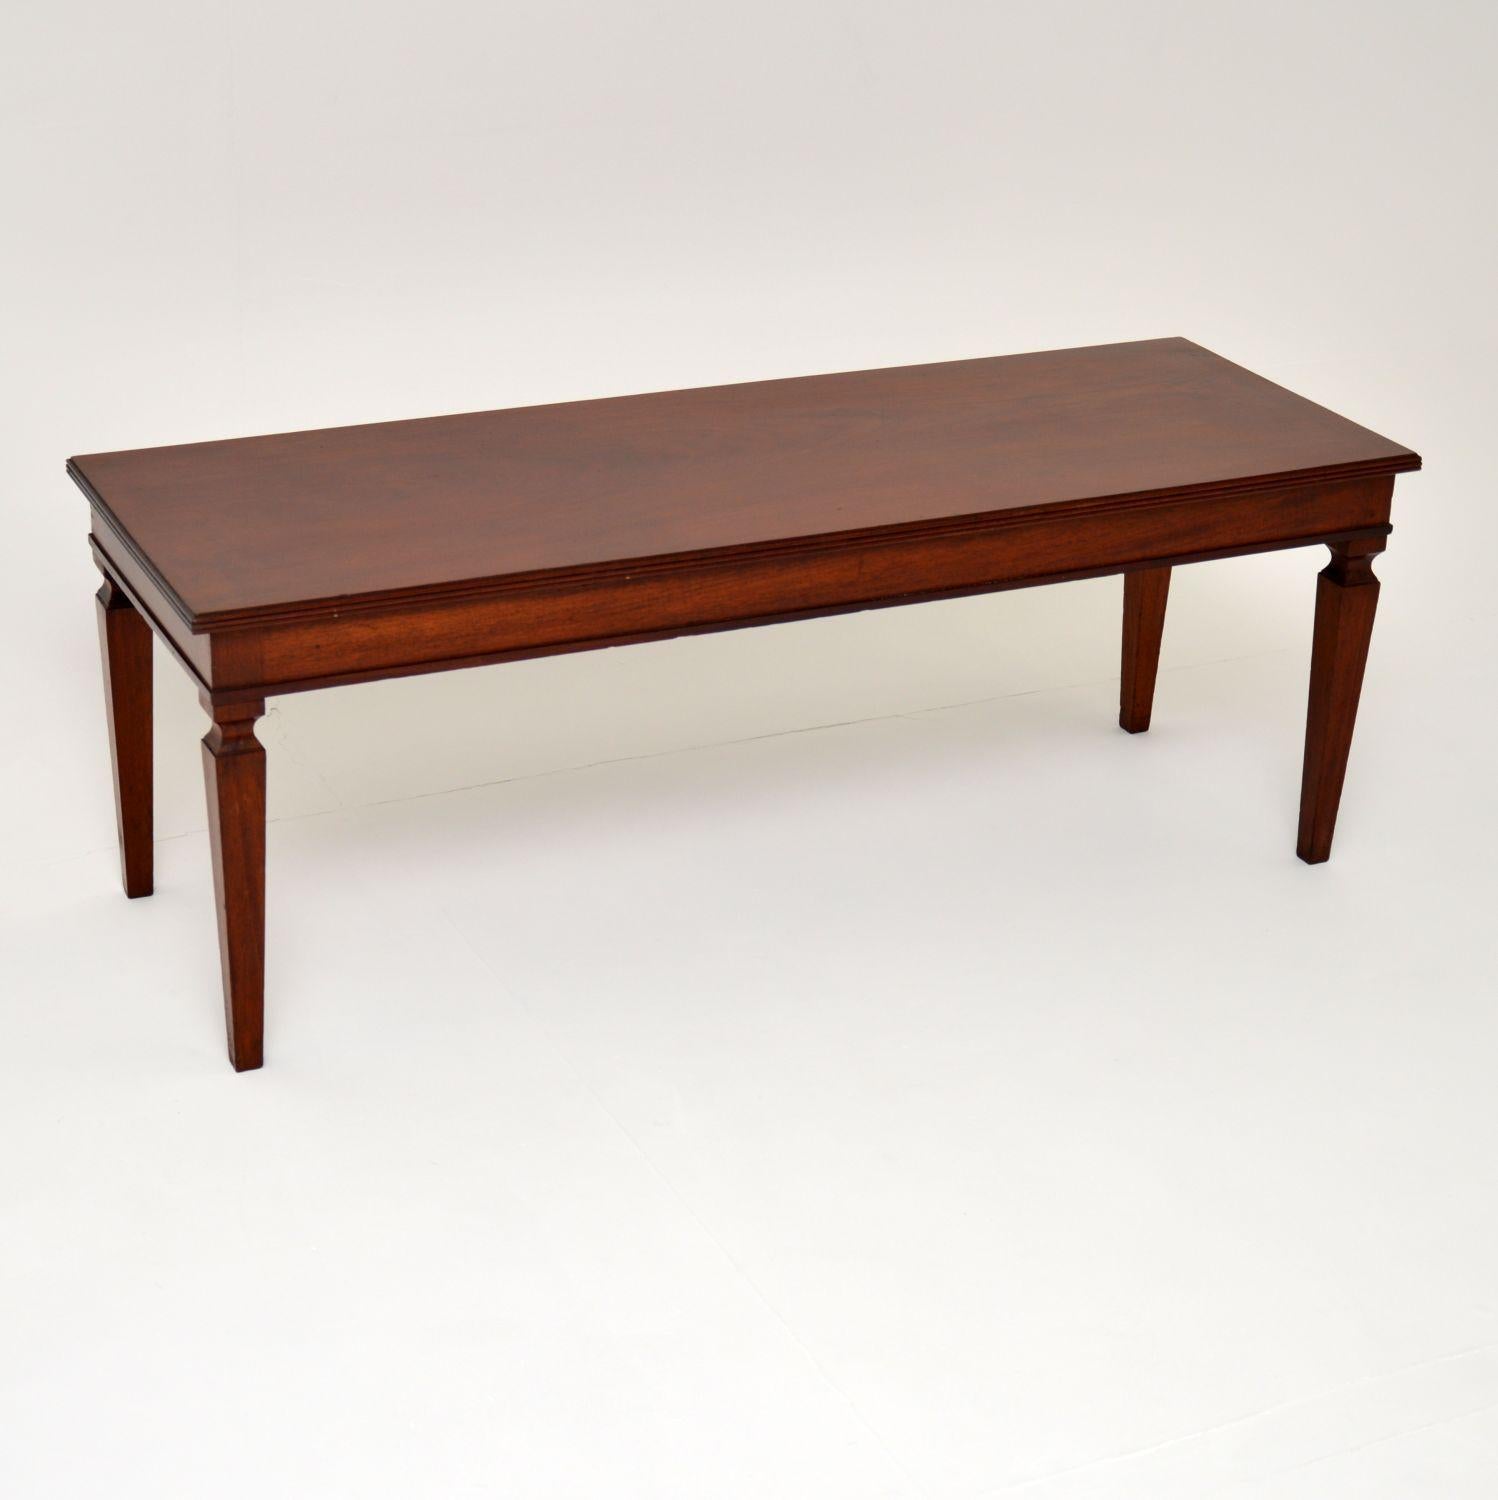 A stylish and very well made antique coffee table in solid wood. This dates from around the 1930’s period.

It is of superb quality, with a fantastic long and slim design. It sits on sturdy yet elegant tapered legs, this is a very useful